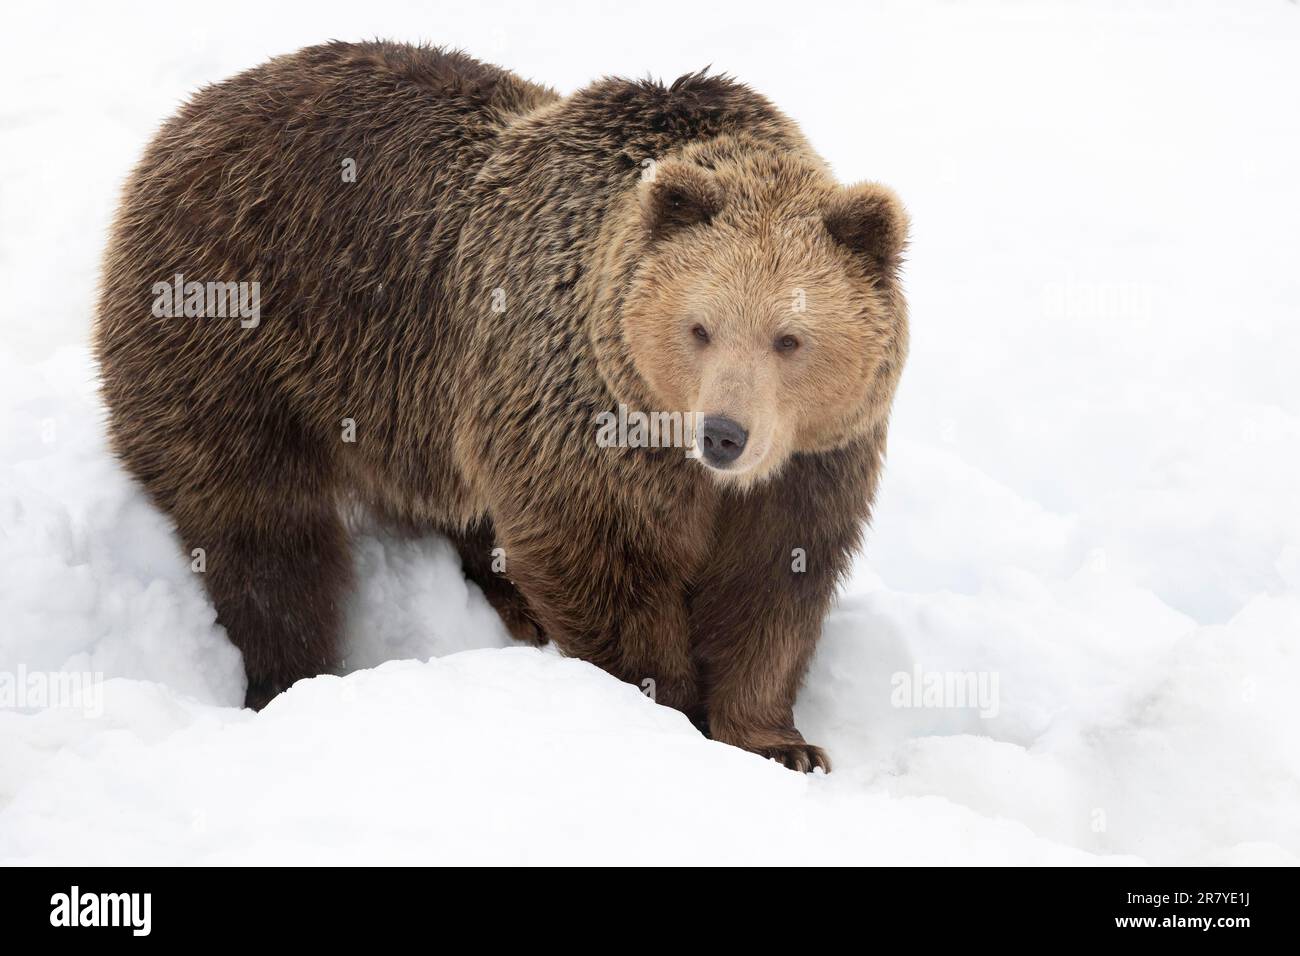 Brown bear (Ursus arctos) shortly after waking up from hibernation Stock Photo